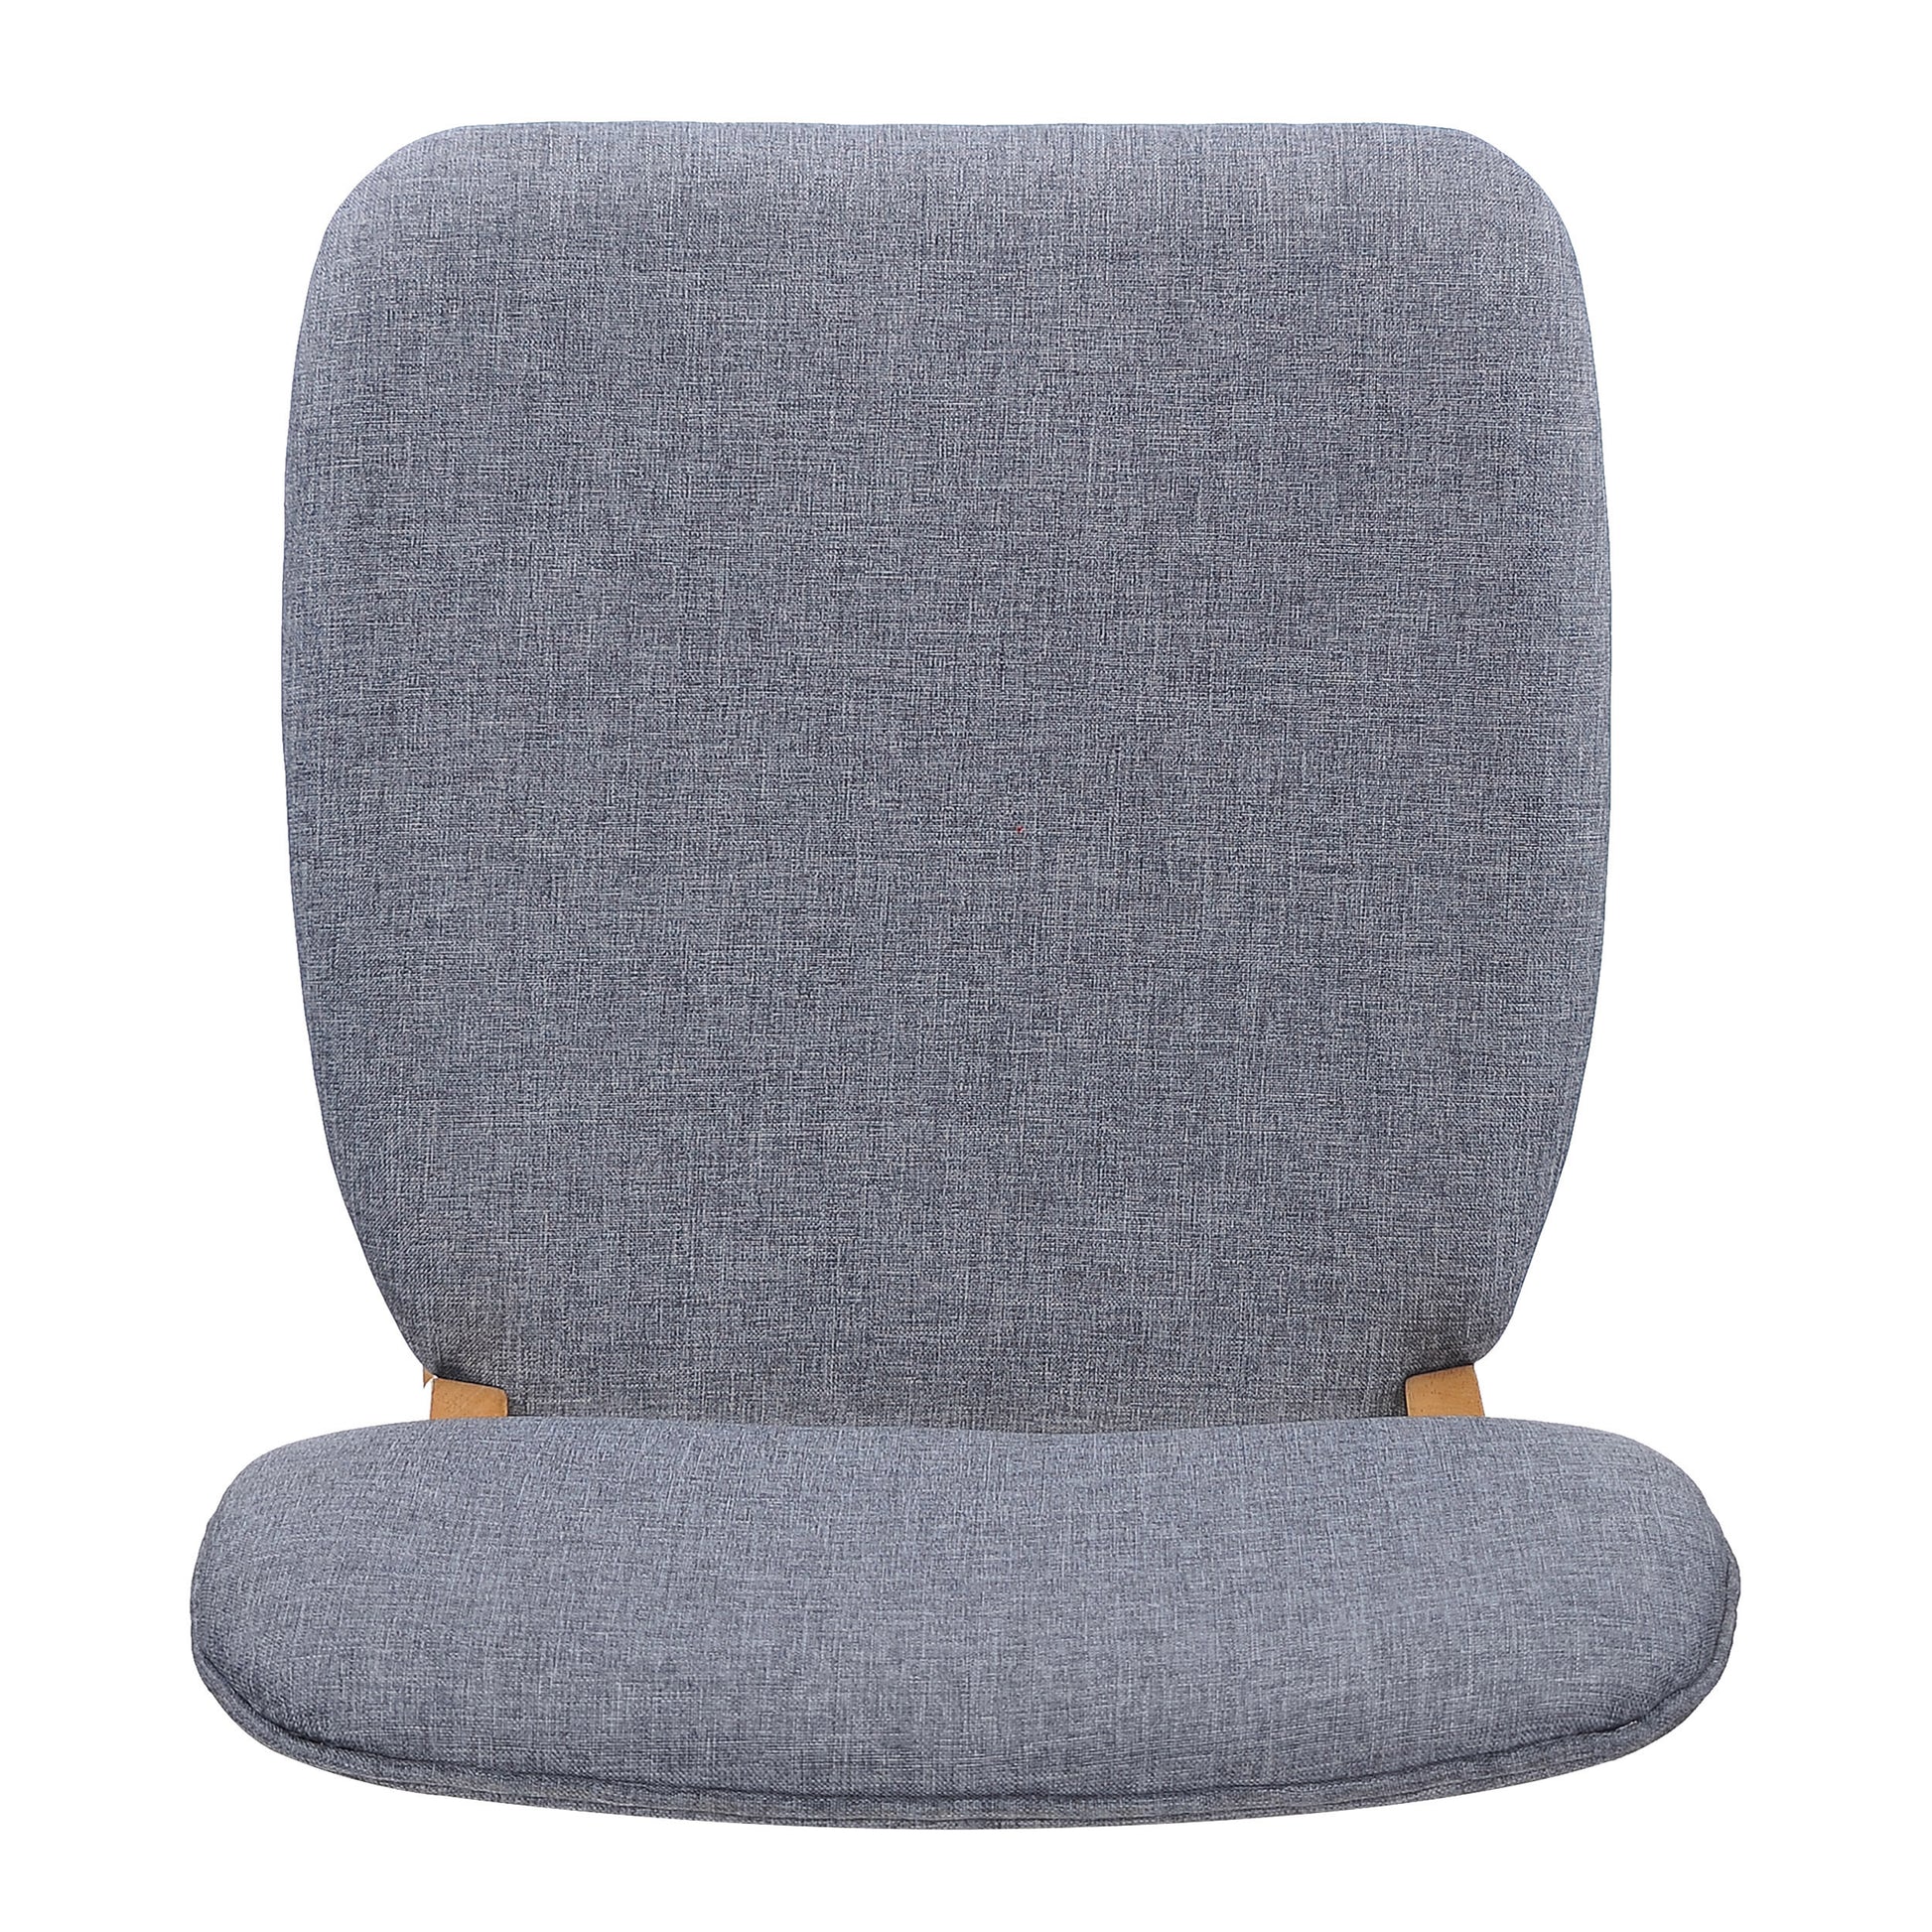 CHAIR Set of 2 gray-fabric